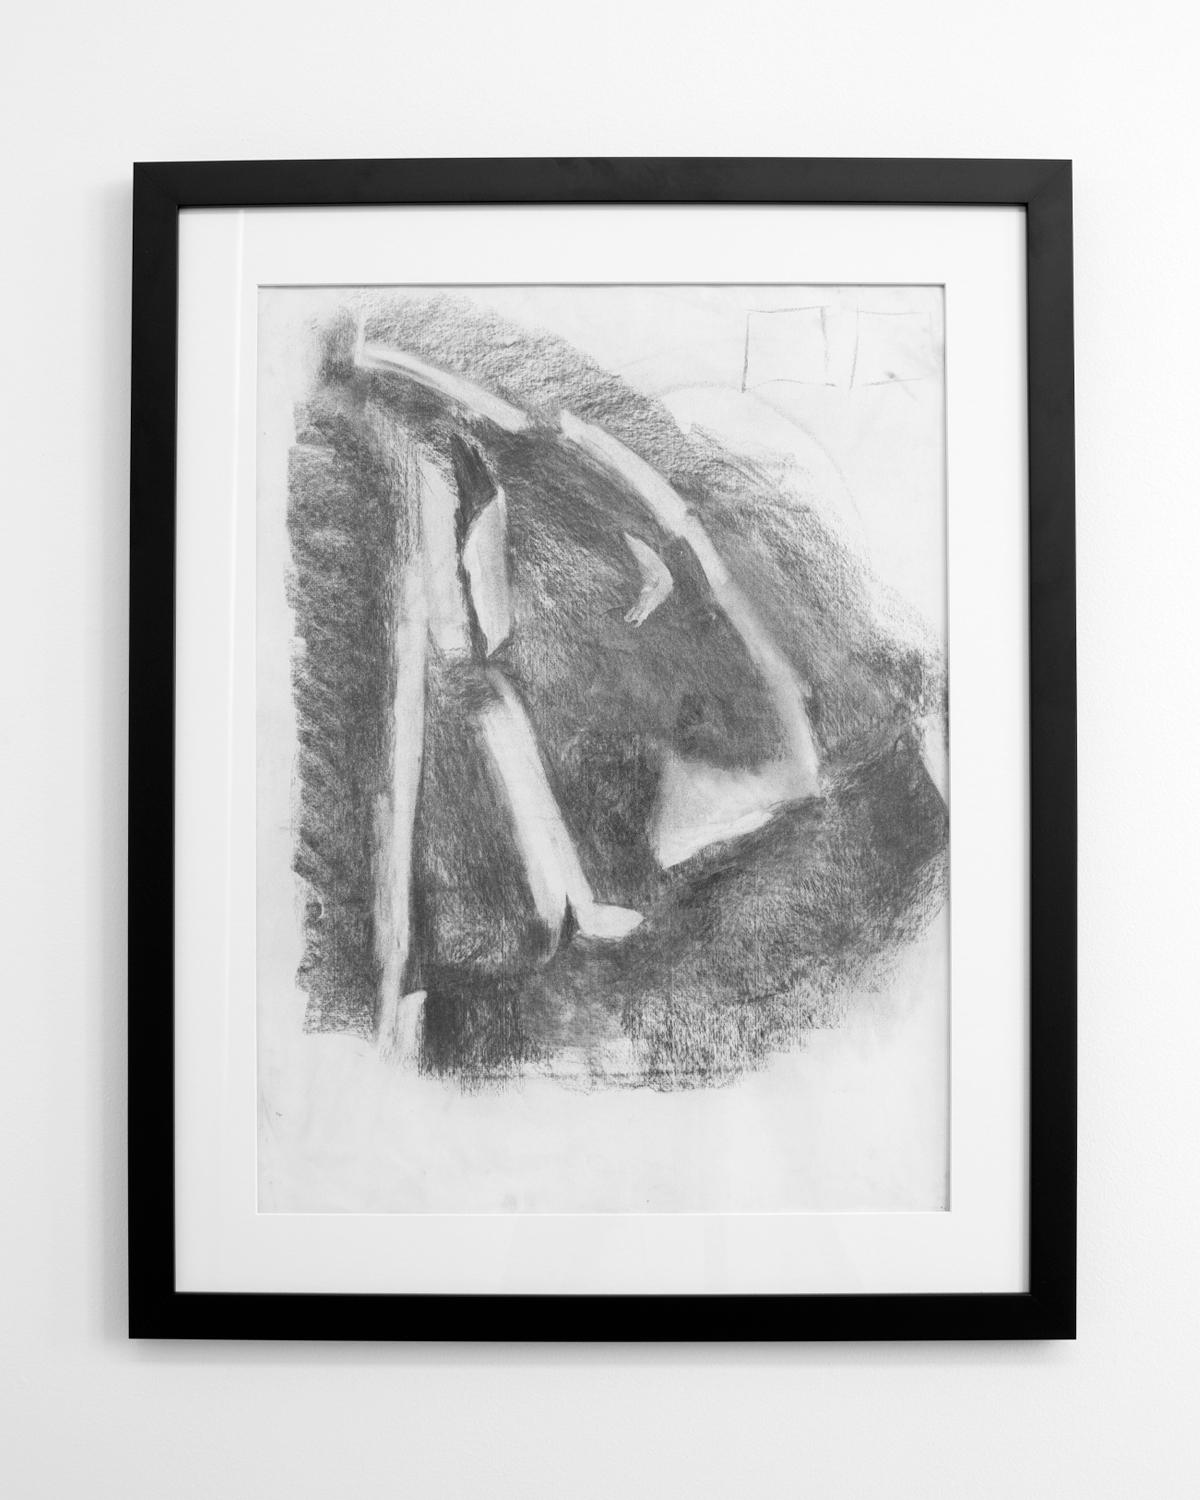 Vintage charcoal drawing on paper newly framed in a simple black frame with wire at back for hanging. We found an assortment of charcoal drawings on paper at an antiques show. All pieces are drawn by an unknown artist that explore various aspects of